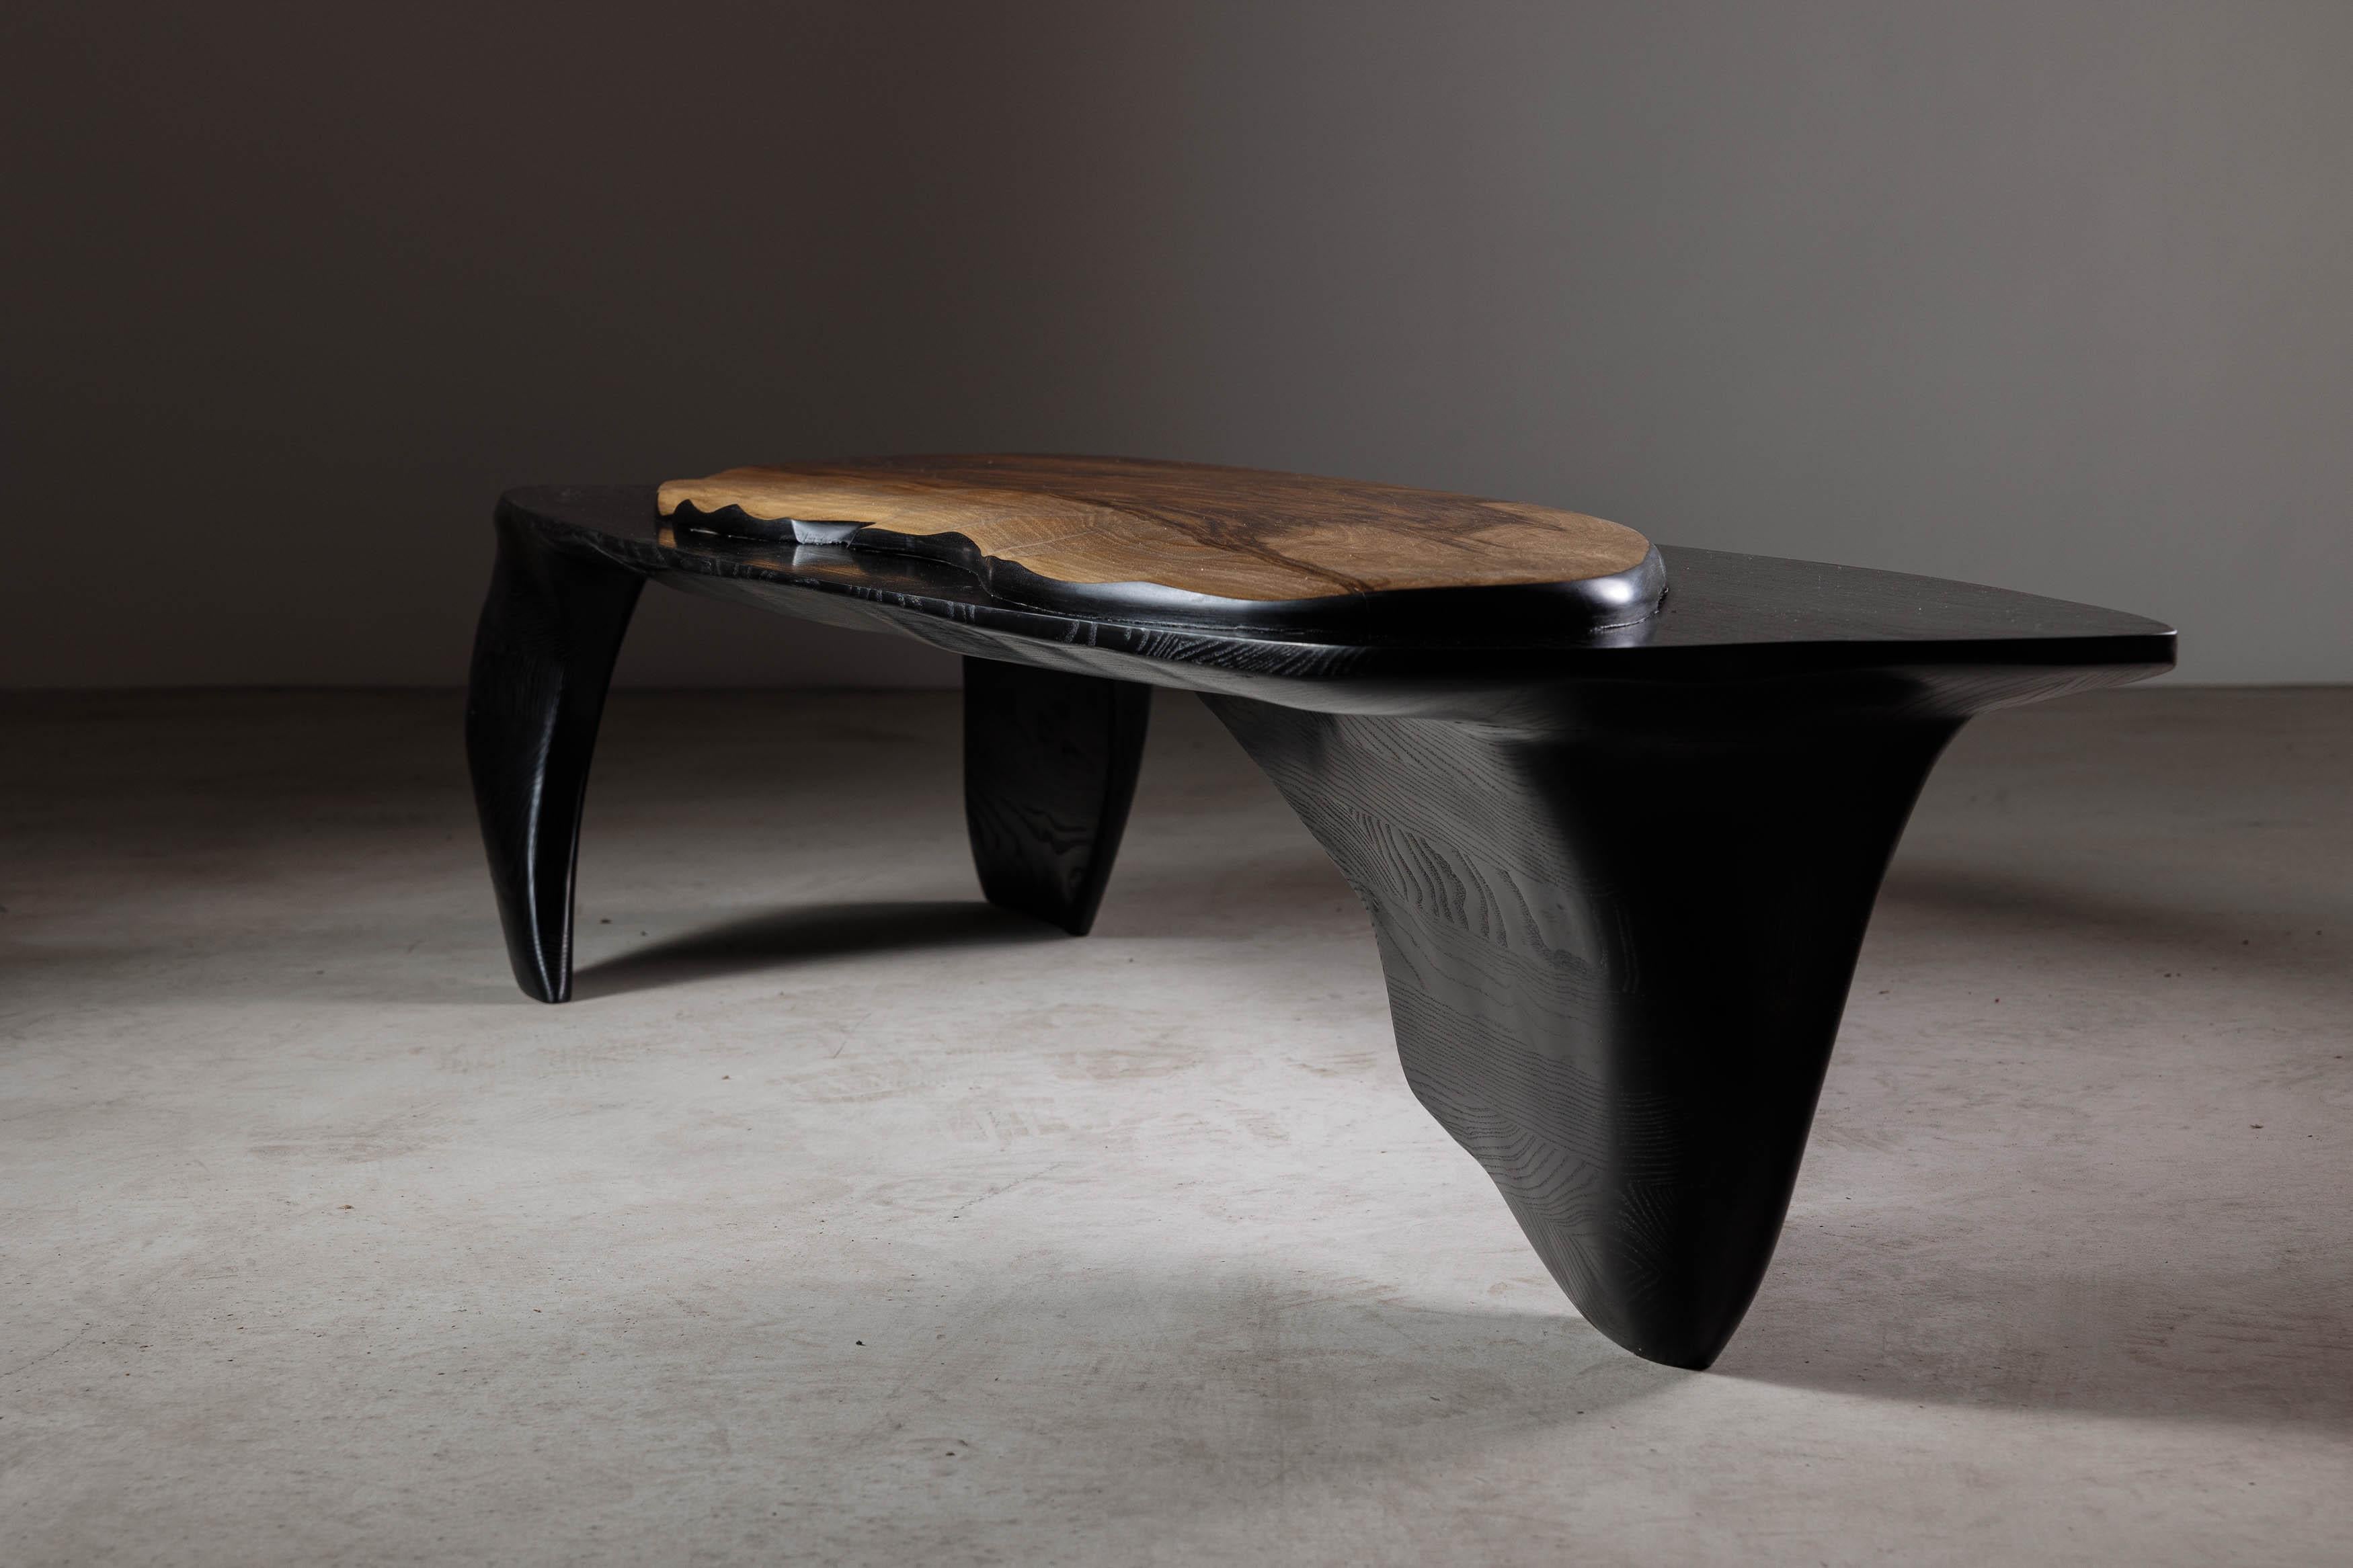 EM110 coffee table by Eero Moss
One of a kind
Dimensions; W 171 x D 49 x H 33 cm
Materials: Walnut, ash, India ink.
Finish: Natural oils.

Erosio Collection

This collection is an ode to the fluid, organic shapes found in the natural world.